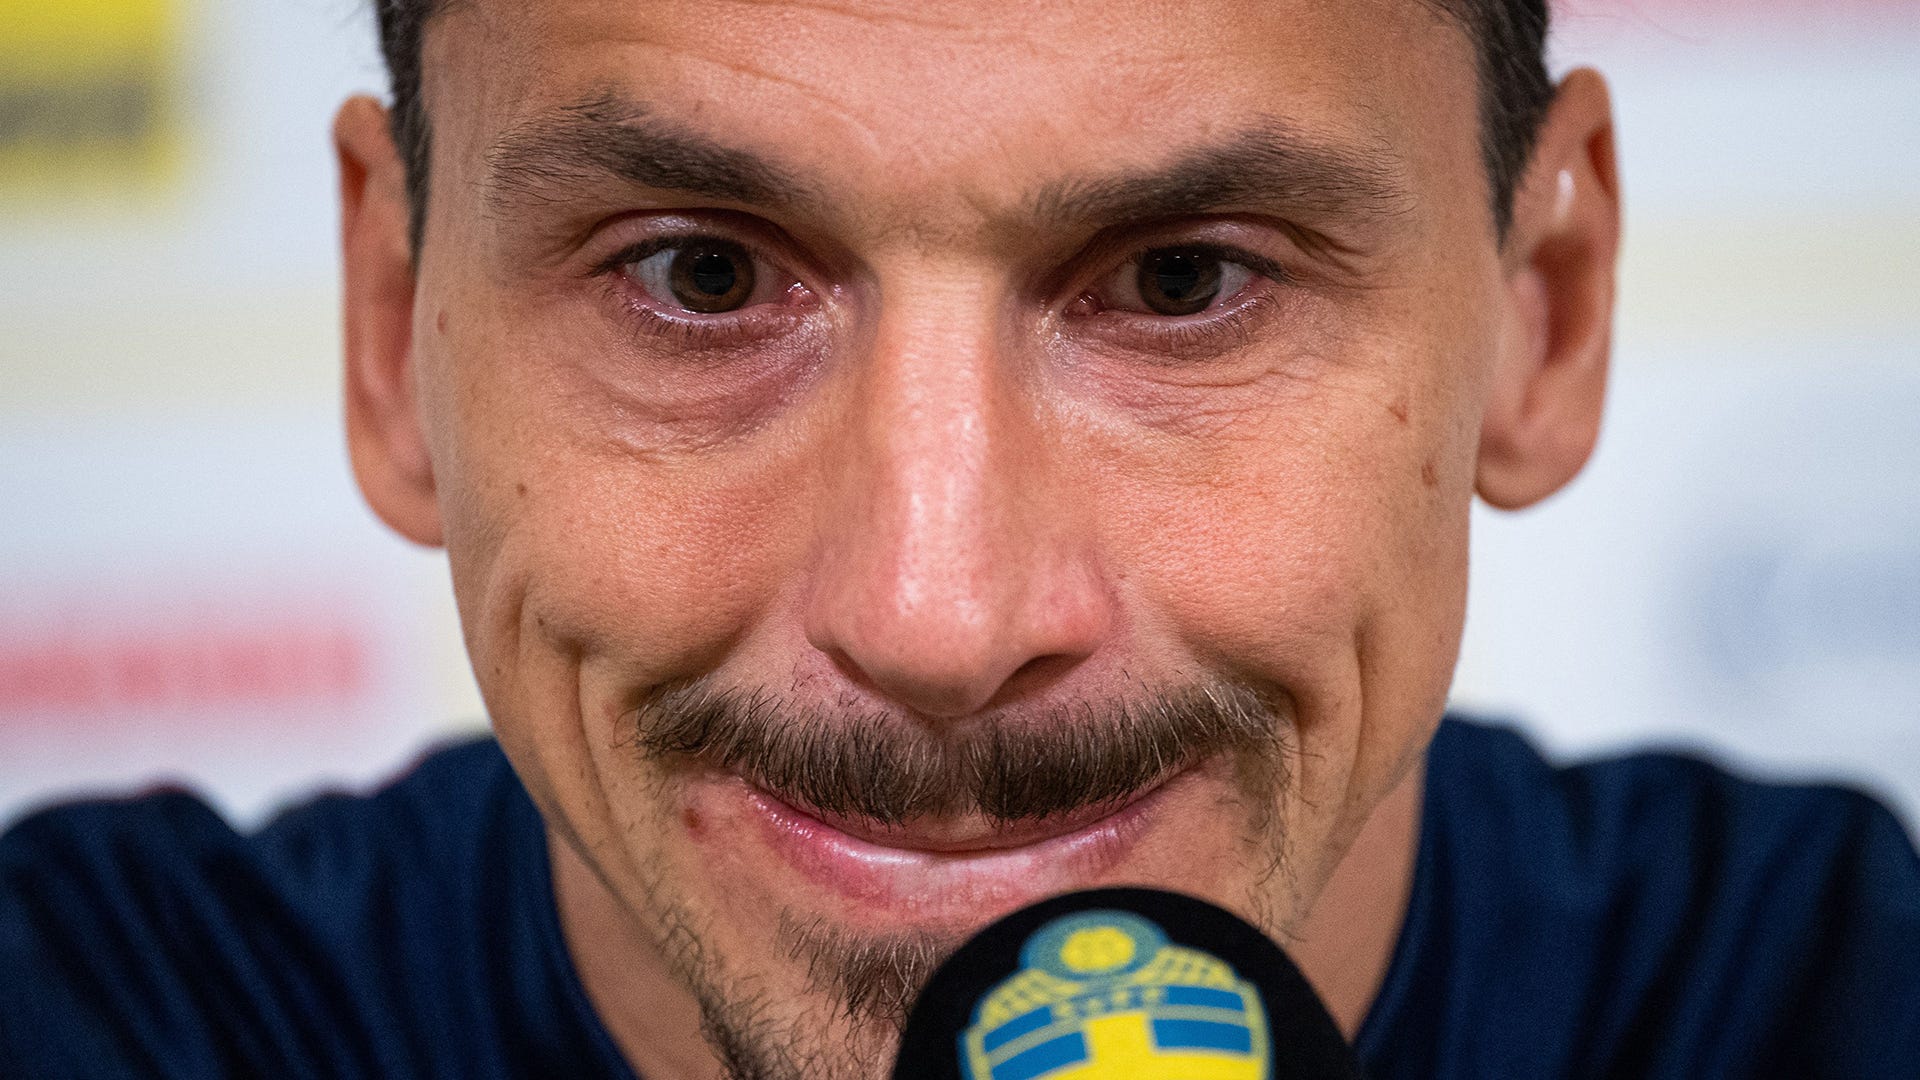 From the Arsenal 'audition' to Guardiola's 'bullsh*t' - Zlatan Ibrahimovic's  most colourful and controversial quotes 